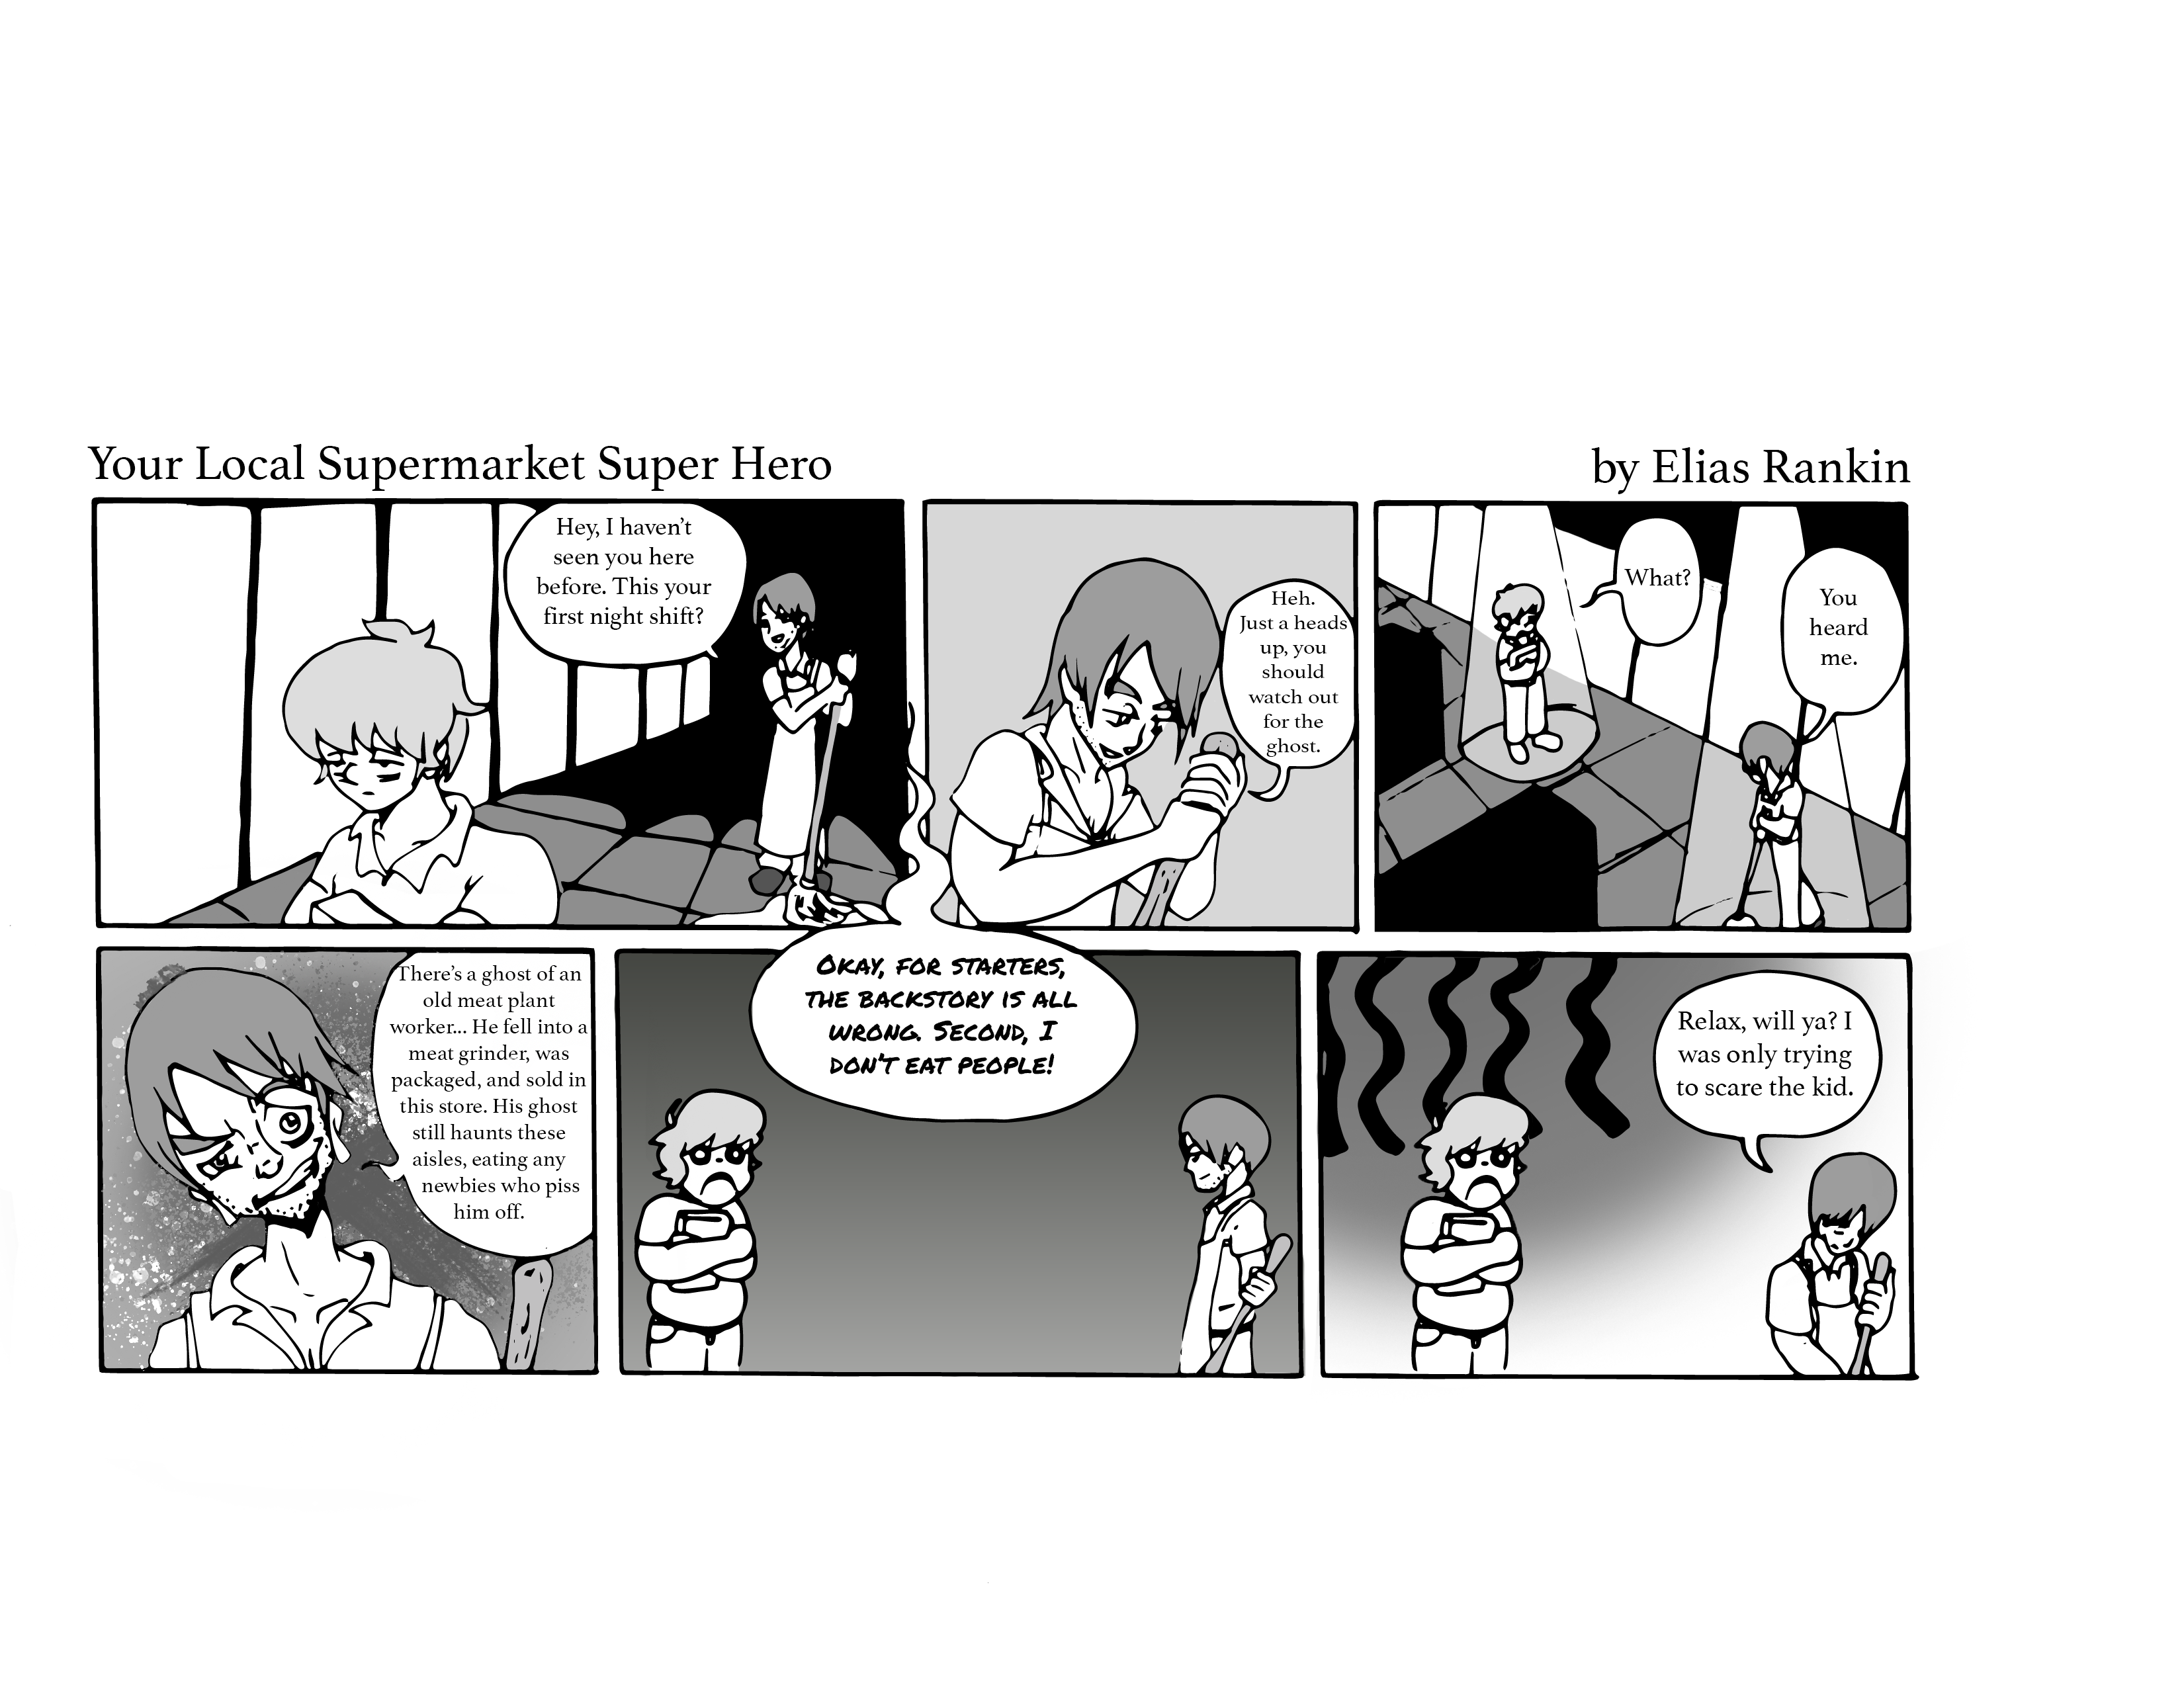 Your Local Supermarket Super Hero comic by Elias Rankin. Frame one: Hey, I haven't seen you here before. This your first night shift? Frame two: Heh. Just a heads up, you should watch out for the ghost. Frame 3: What? You heard me. Frame 4: There's a ghost of an old meat plant worker... He fell into a meat grinder, was packaged, and sold in this store. His ghost still haunts these aisles, eating any newbies who piss him off. Frame 5: Ghost: Okay, for starters, the backstory is all wrong. Second, I don't eat people. Final frame: Relax, will ya? I was only trying to scare the kid.